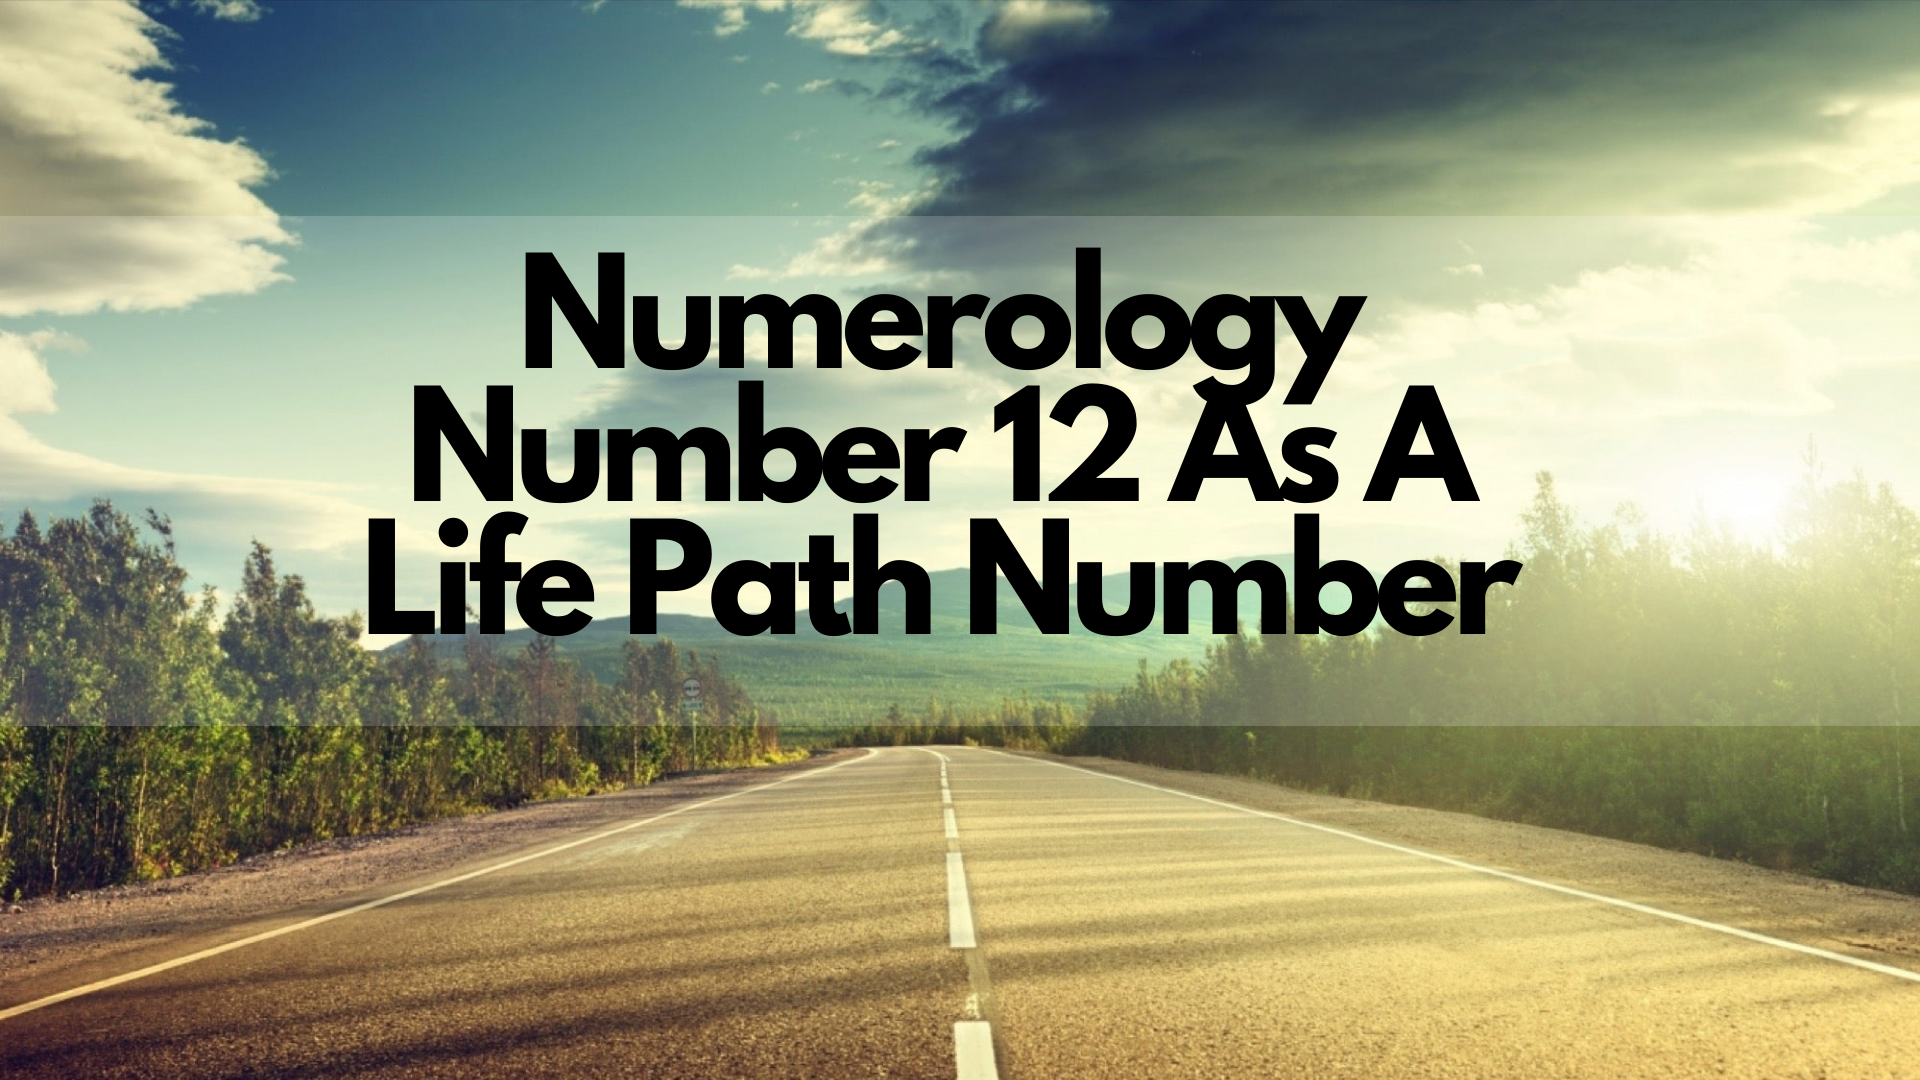 A road going to a mountain with some trees on the side and words Numerology Number 12 As A Life Path Number